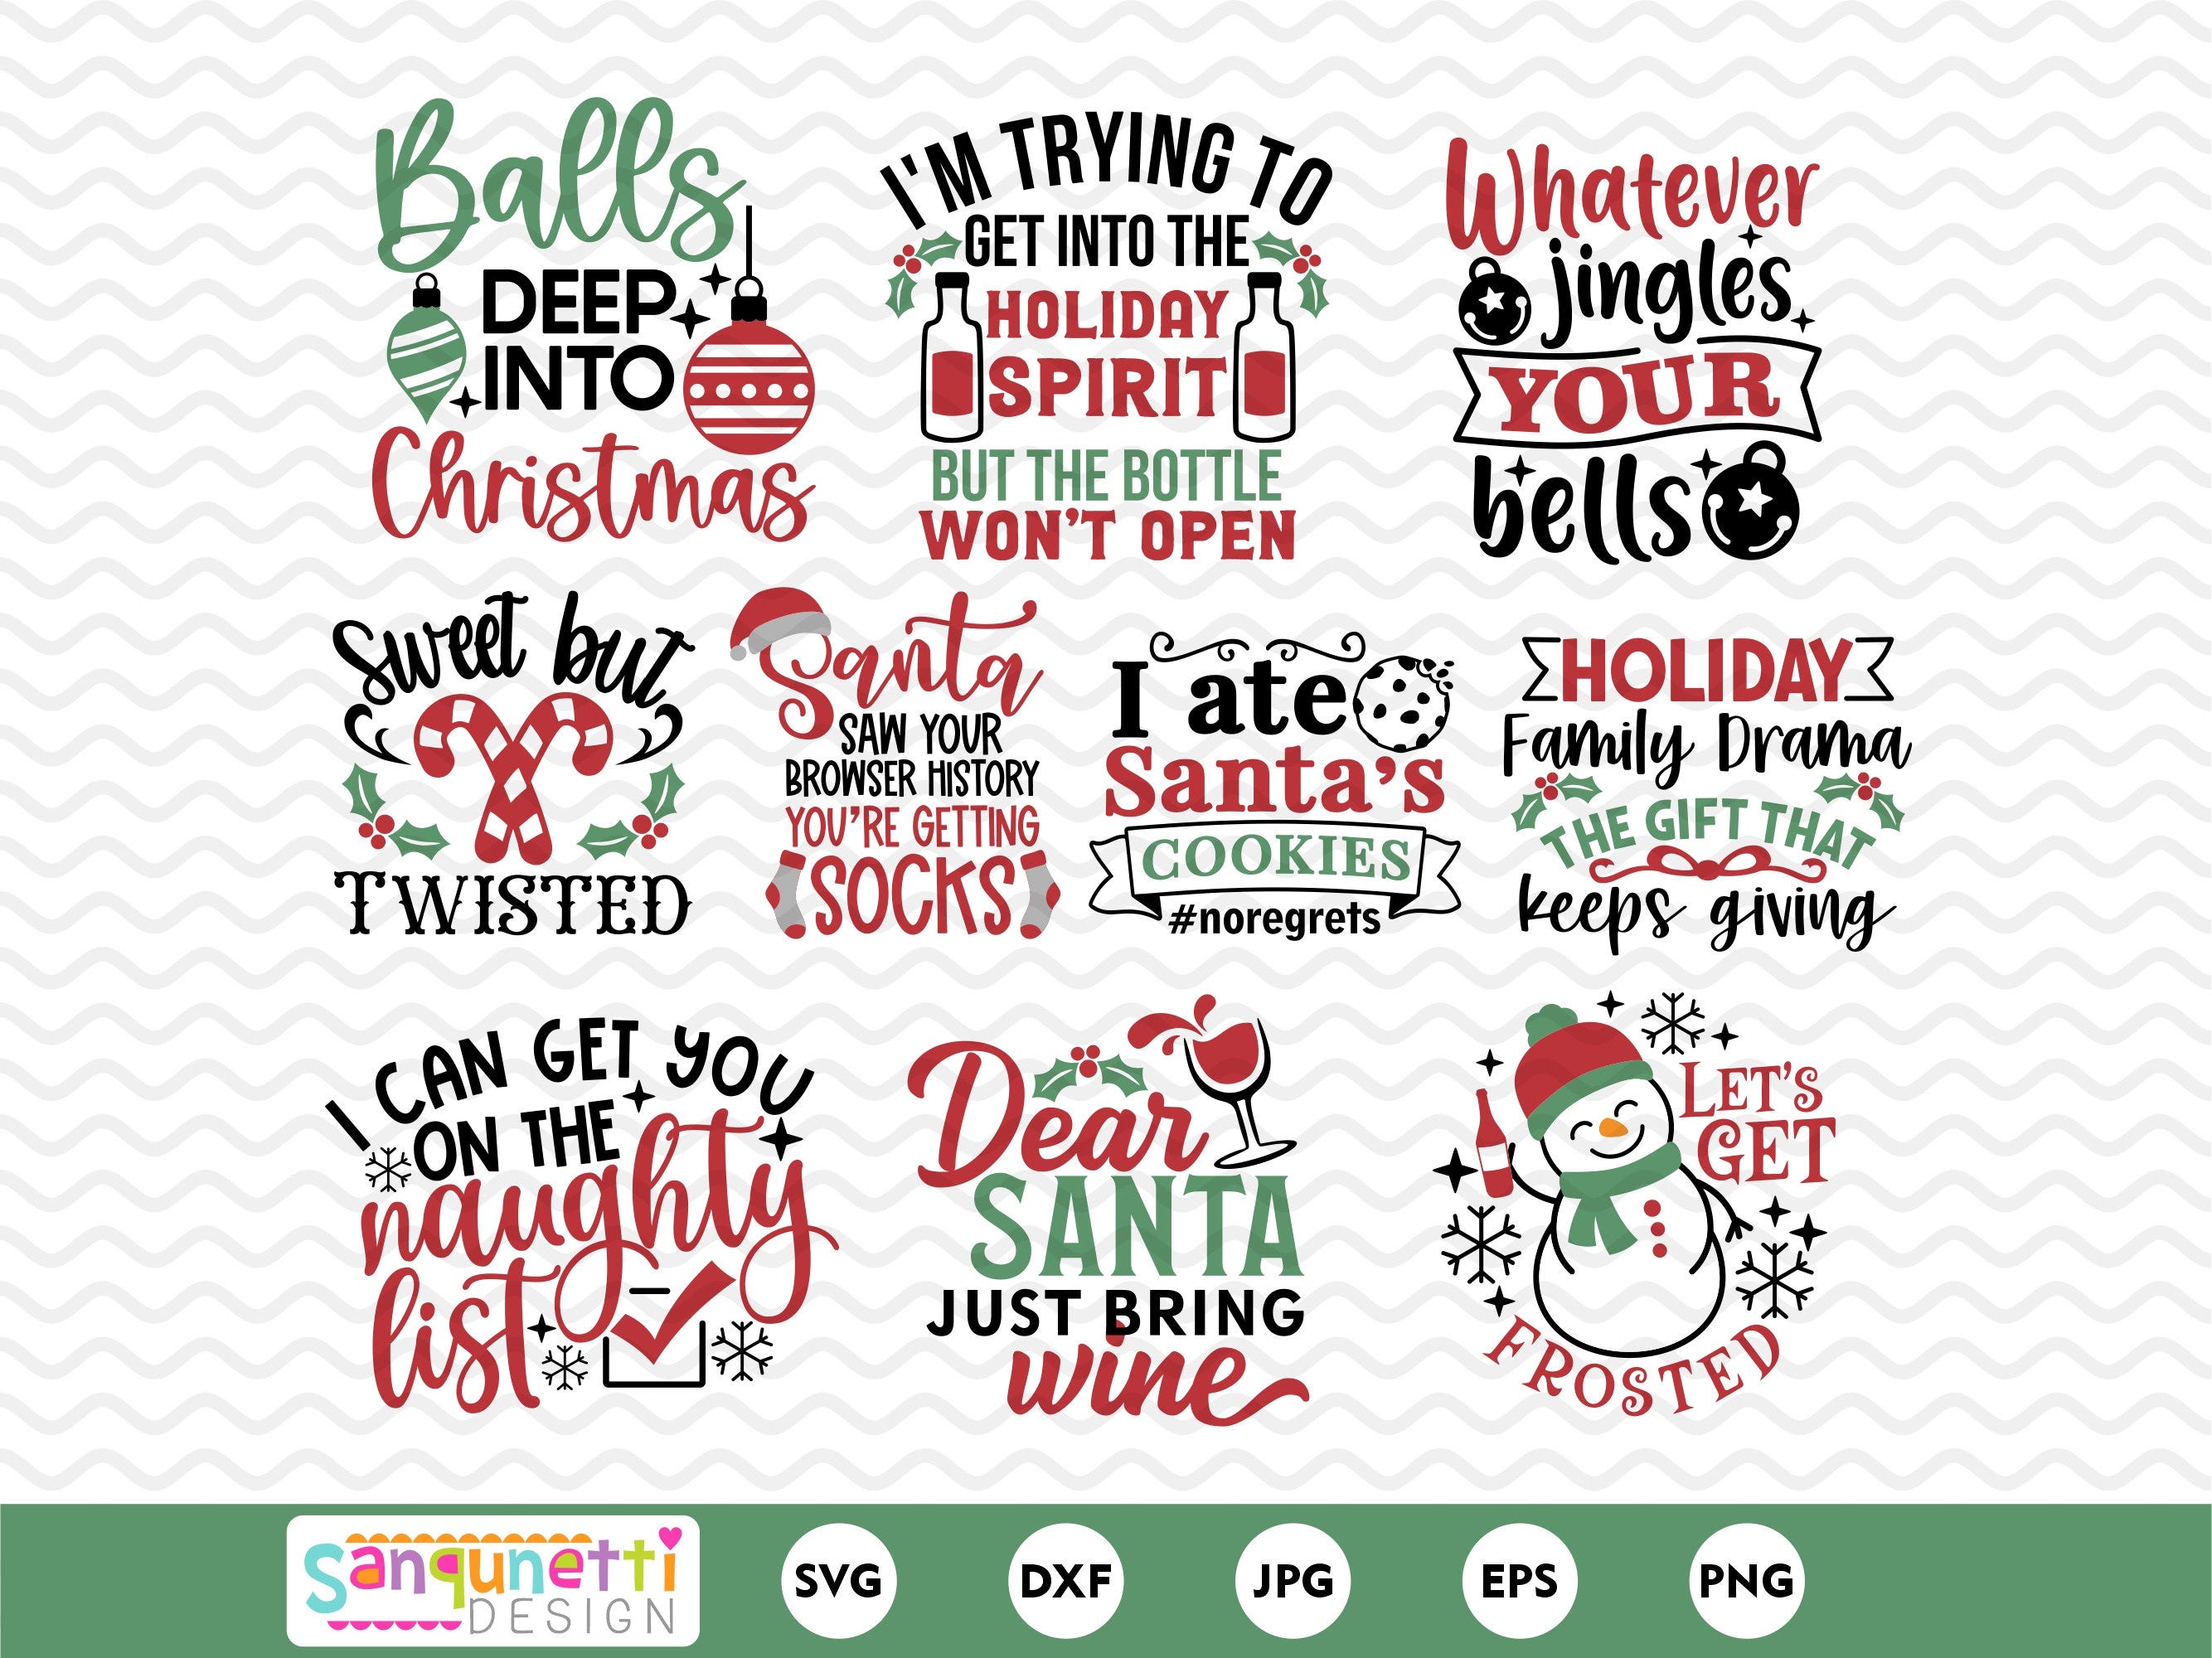 Funny and sarcastic Christmas clipart, Funny Christmas SVG bundle, snarky digital art instant download